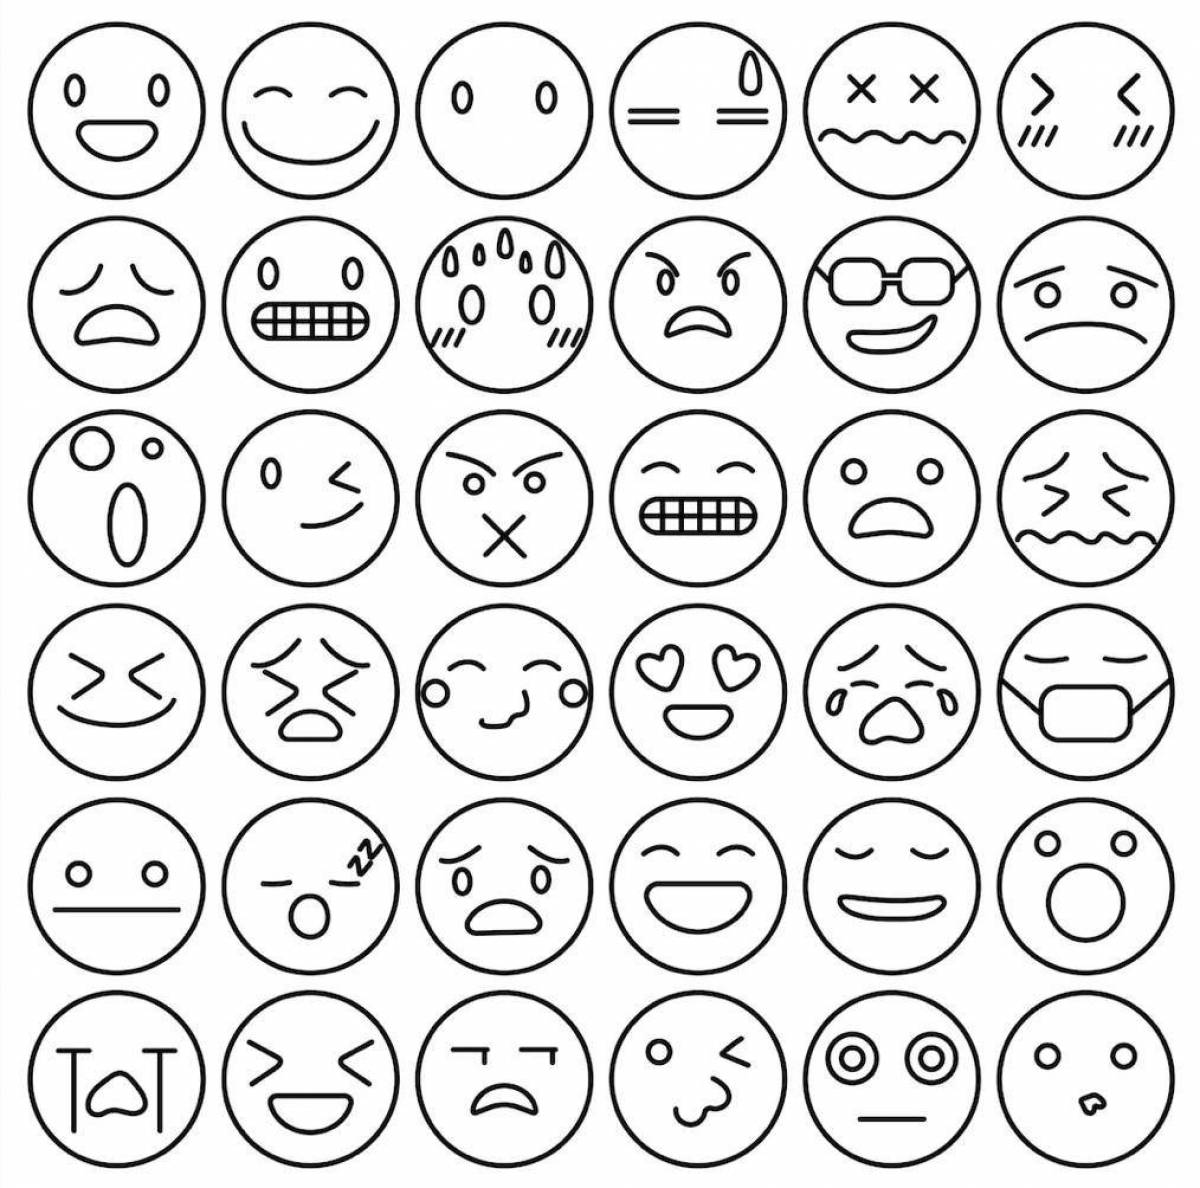 Coloring page with funny emoji